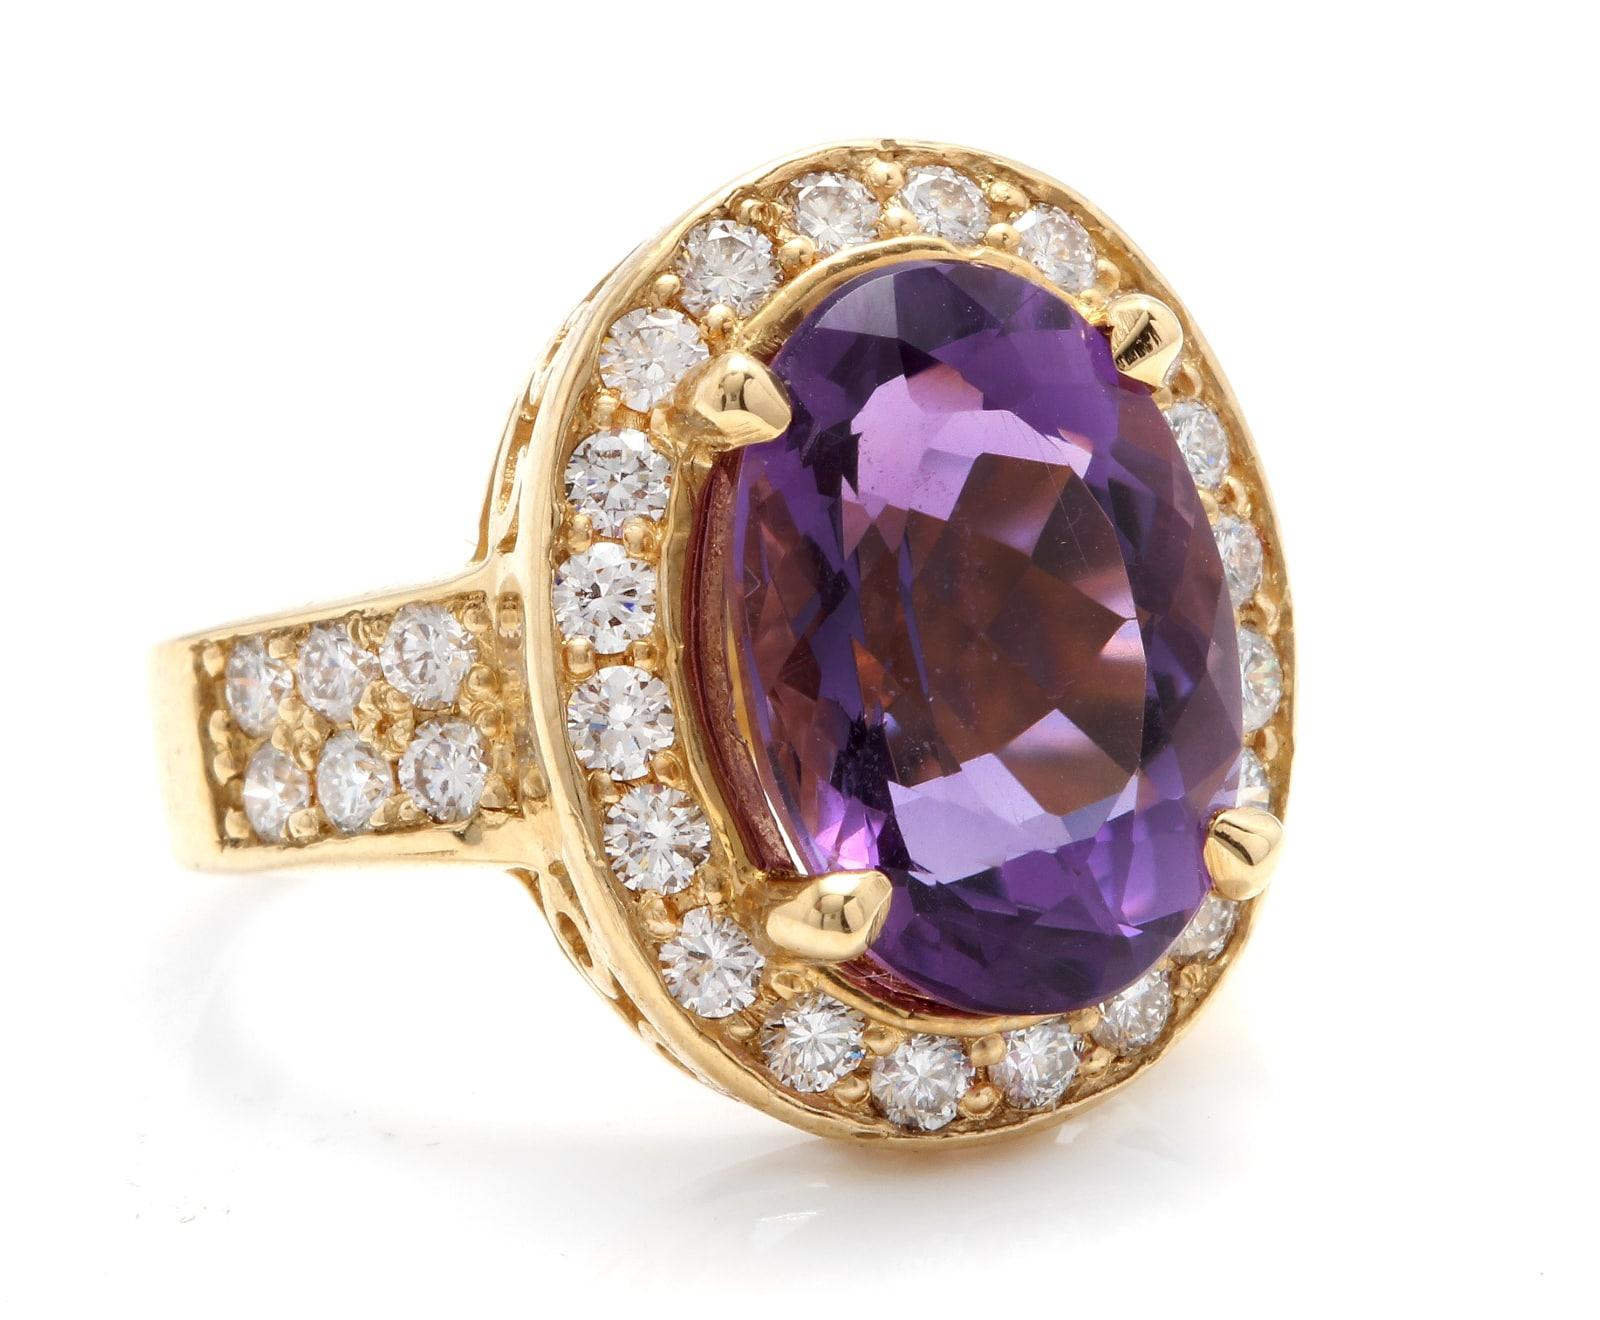 7.20 Carats Natural Impressive Amethyst and Diamond 14K Yellow Gold Ring

Total Natural Amethyst Topaz Weight: Approx. 6.00 Carats

Amethyst Measures: Approx. 14 x 10mm

Head of the ring measures: 18.00 x 15.00mm

Natural Round Diamonds Weight: